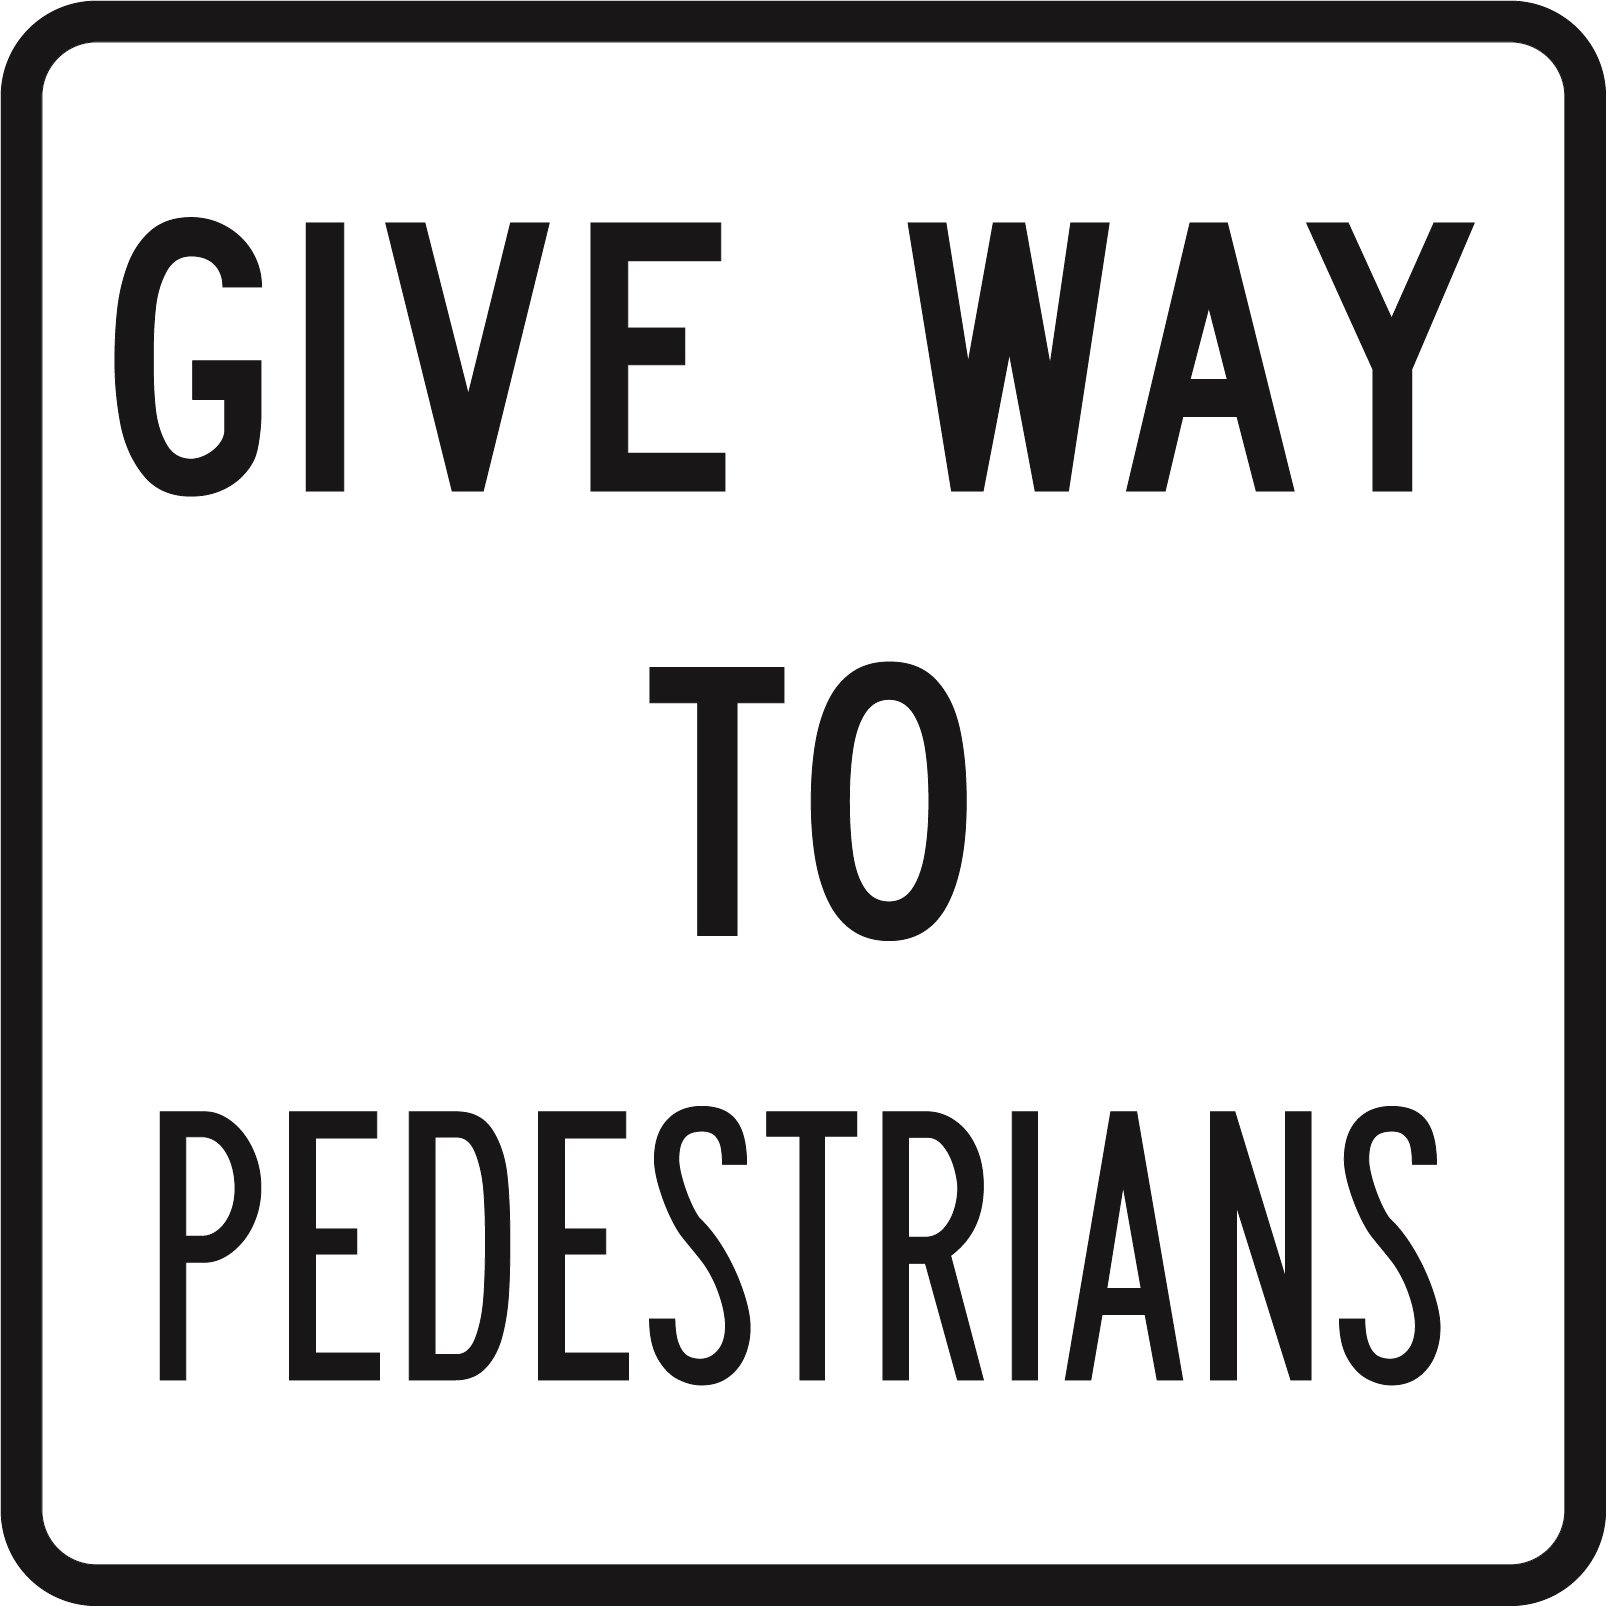 Give Way To Pedestrians - Cl1 Black/White